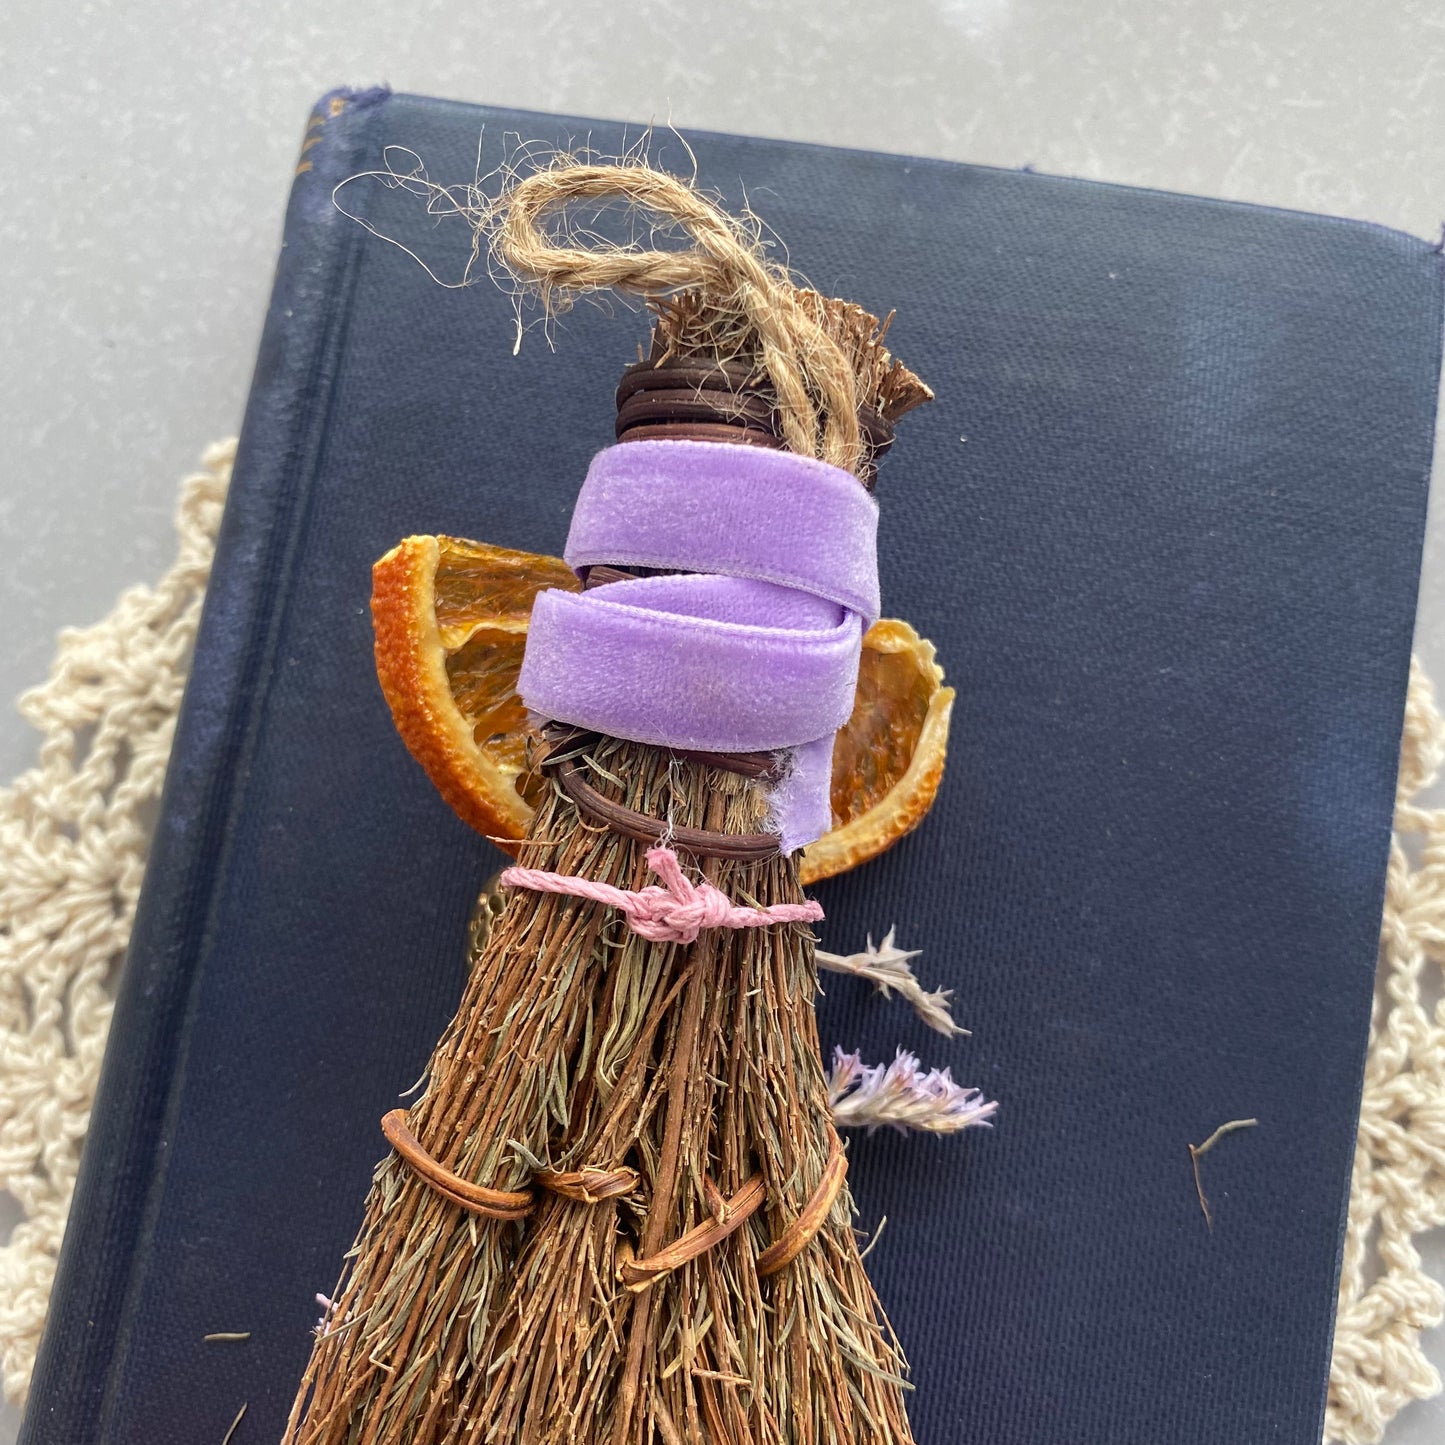 Scented Spring blessing broom besom - purple moon